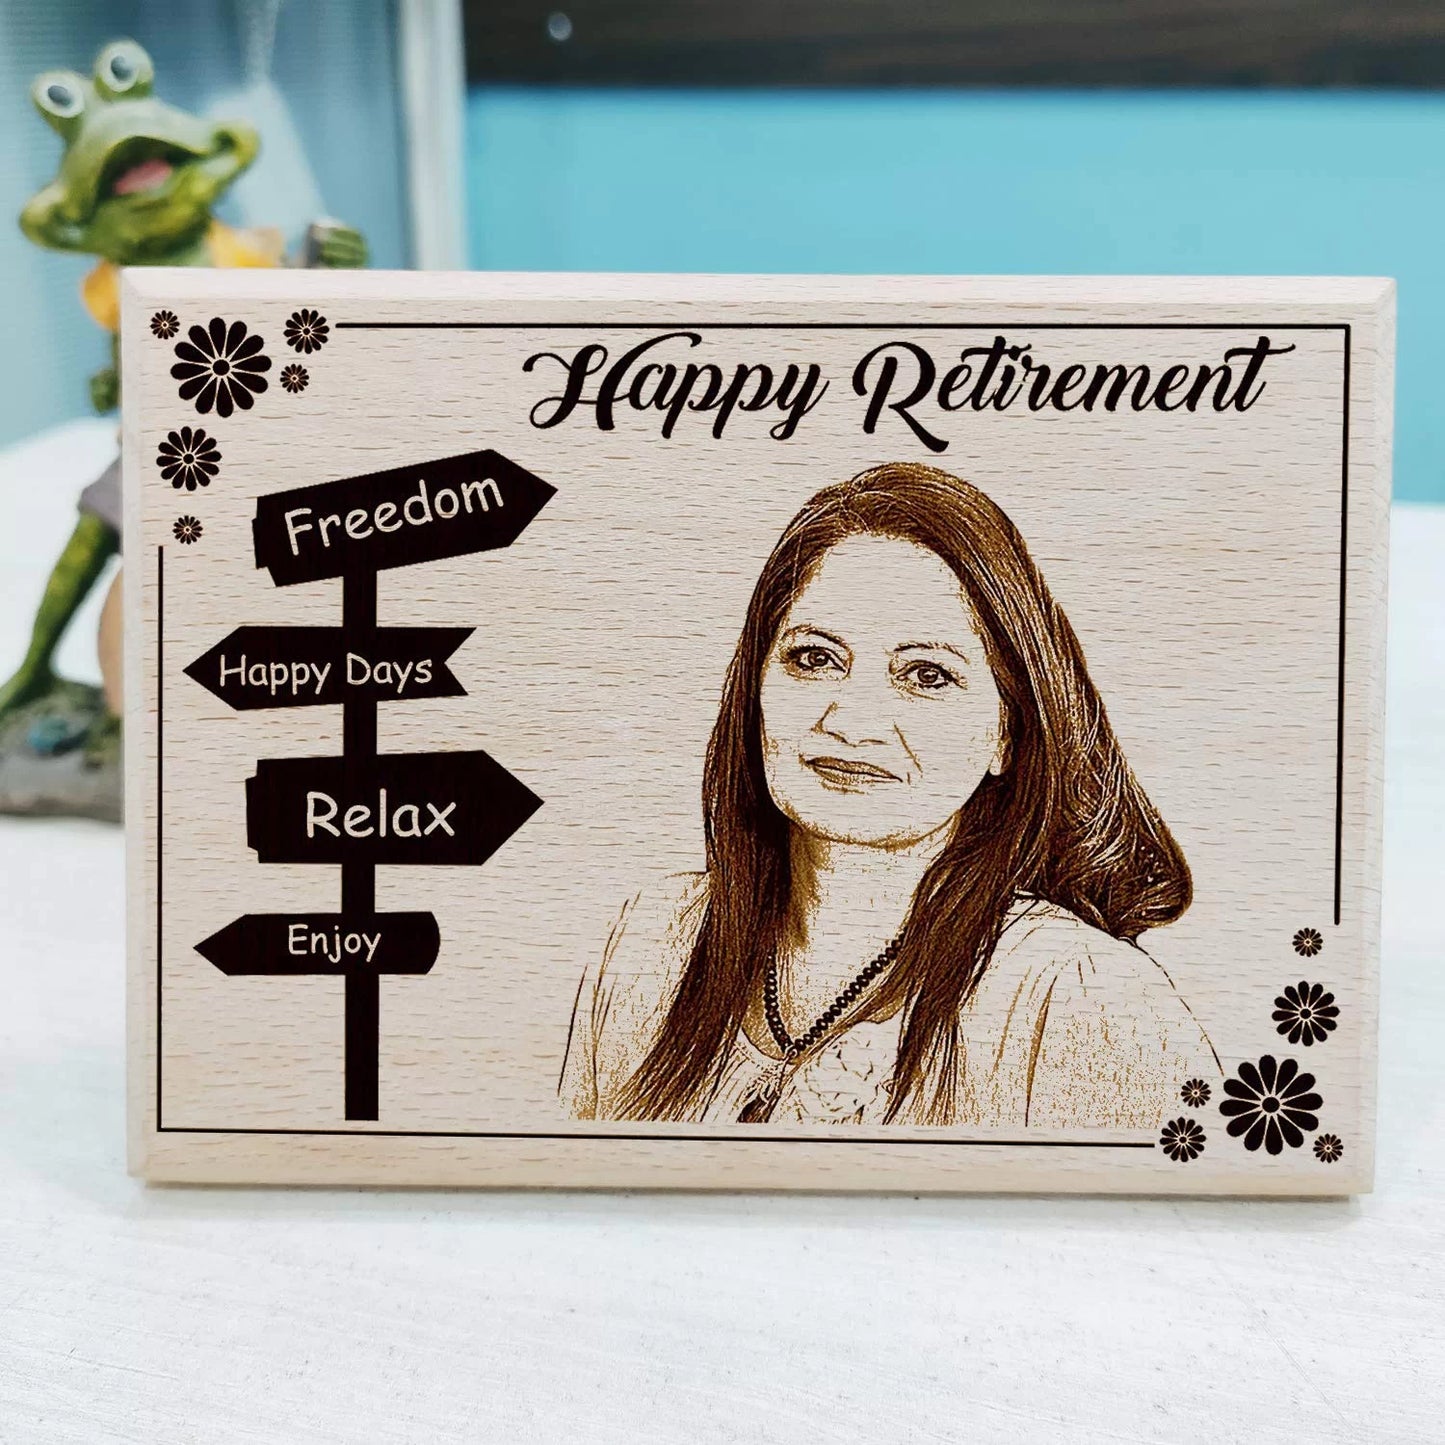 Personalized Engraved Photo Frame Gift for Him or Her (9 X 12 inch Wood)